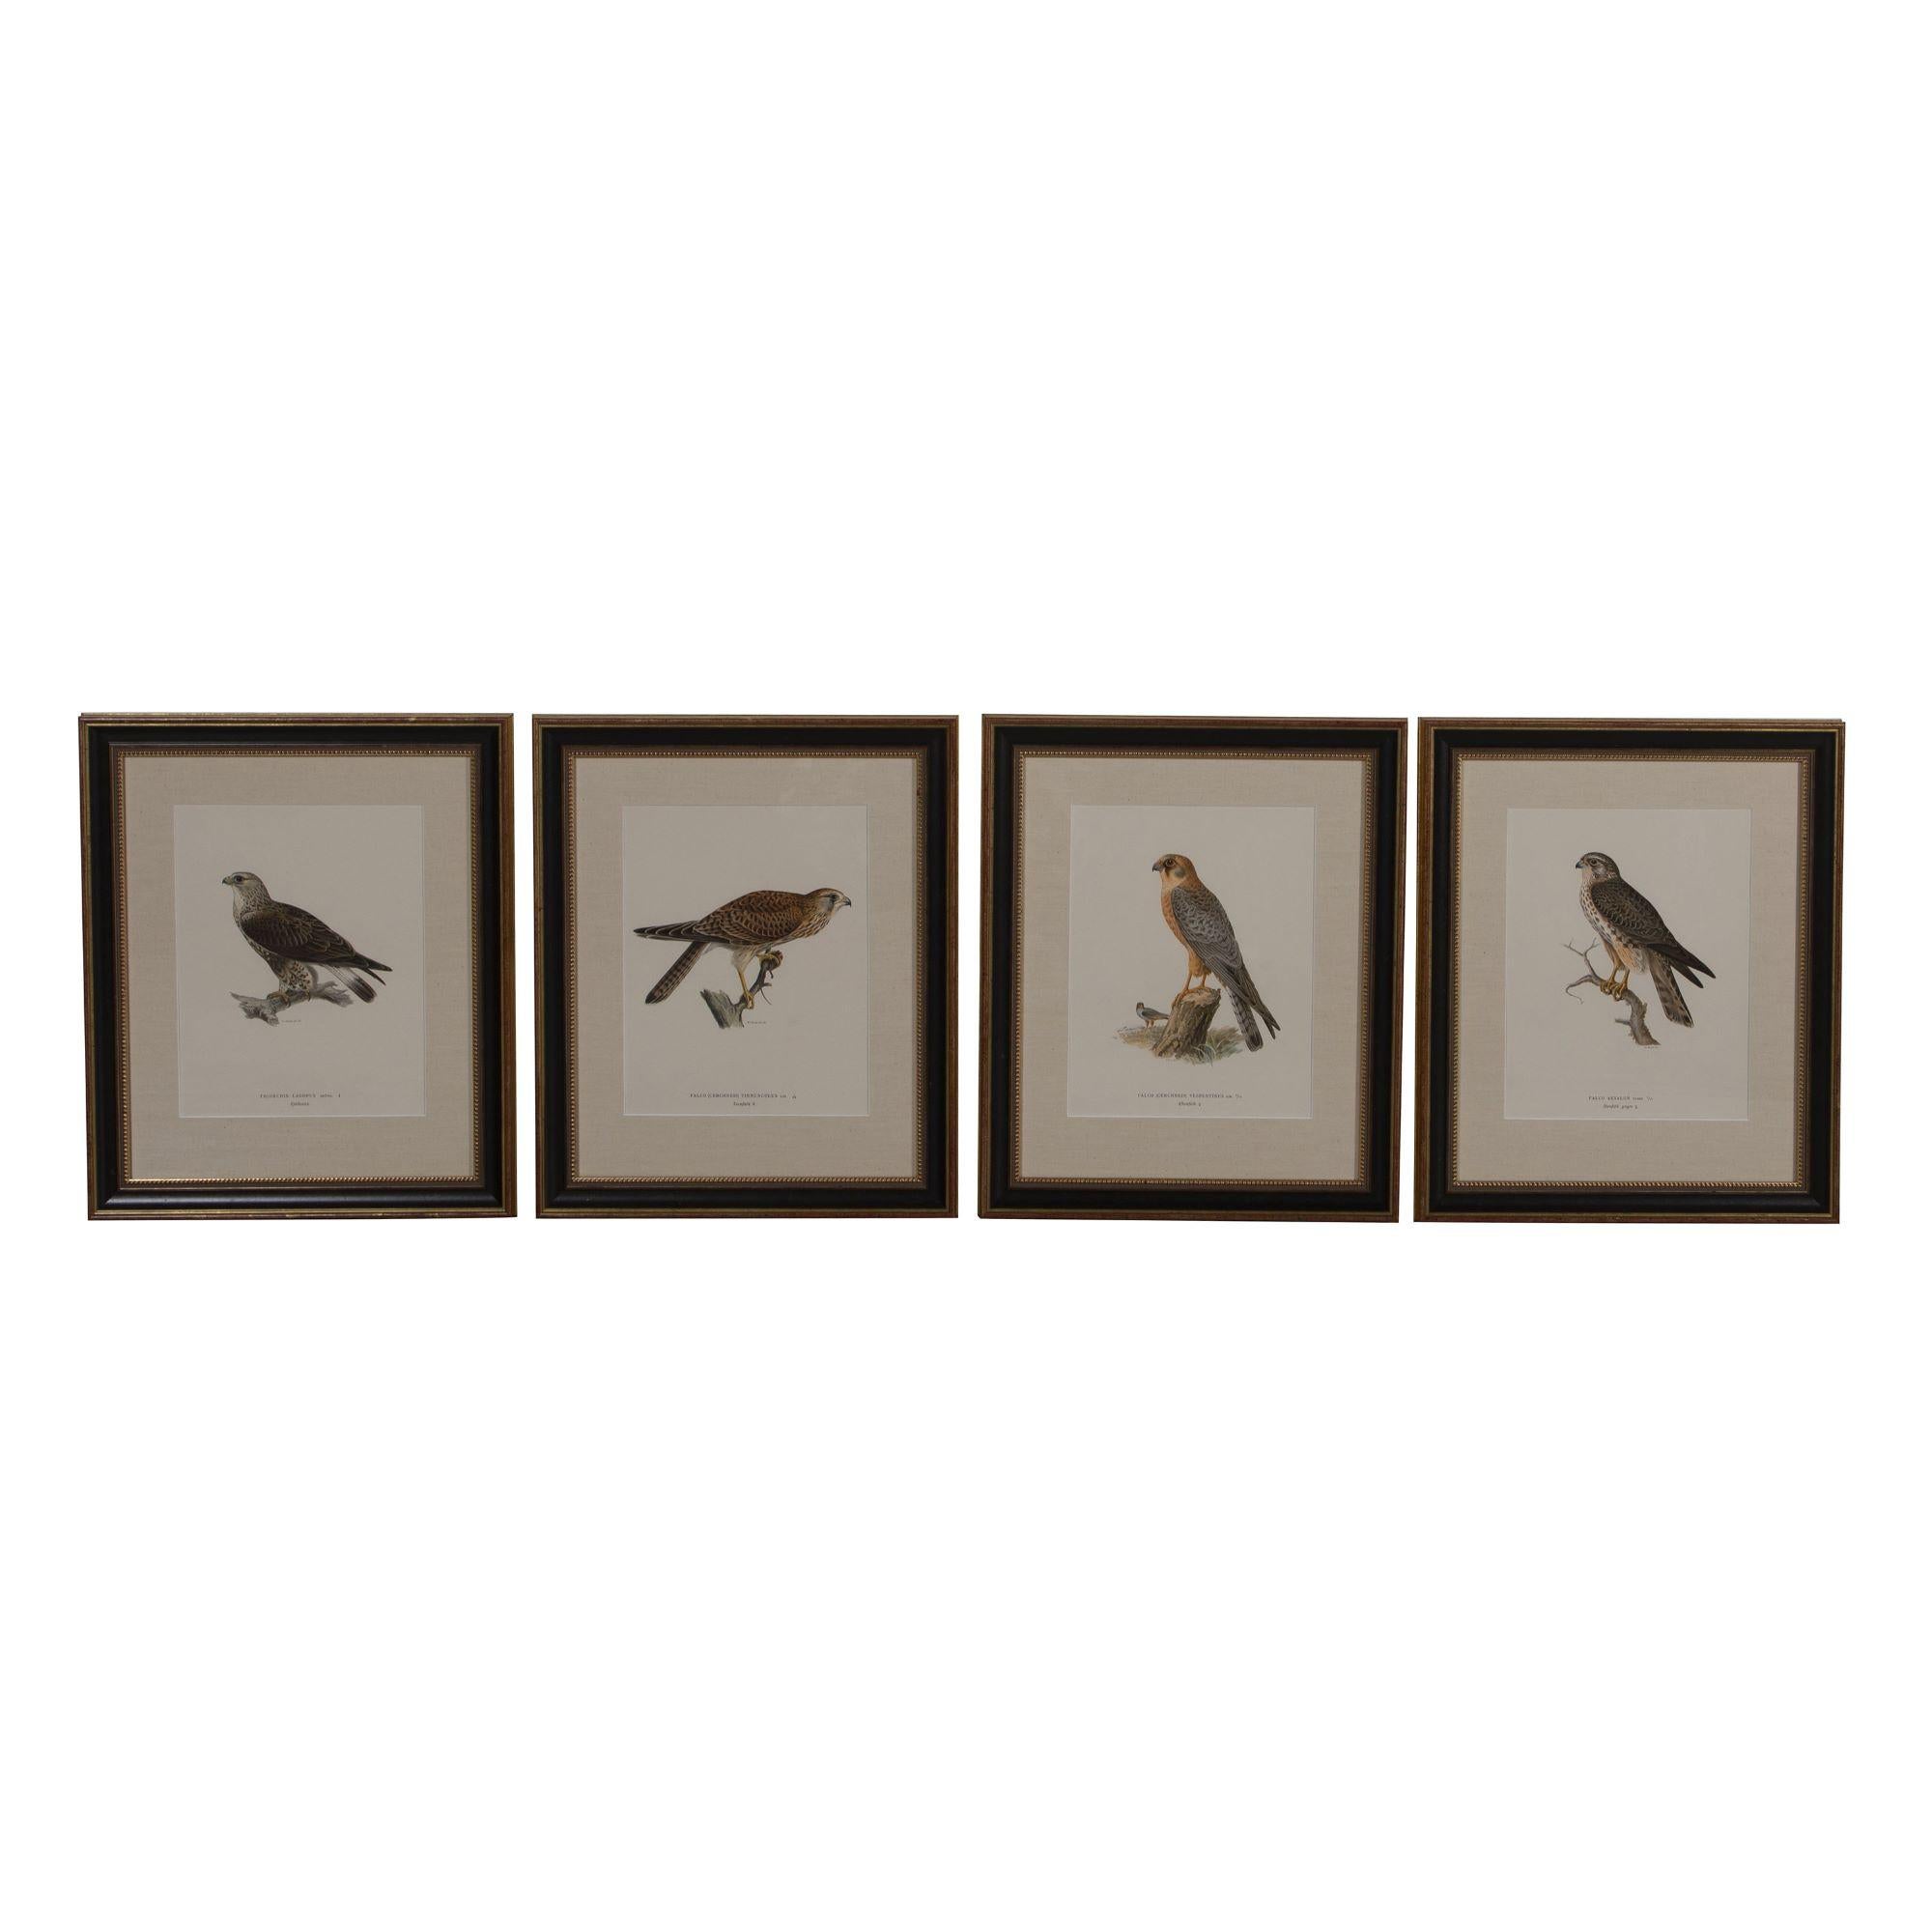 This collection of Swedish birds of prey is by the Finnish artists Magnus von Wright (1805-1868) and Wilhelm von Wright (1810-1887) who were well known in the 1800s as both artists and ornithologists. They captured details and colors not previously